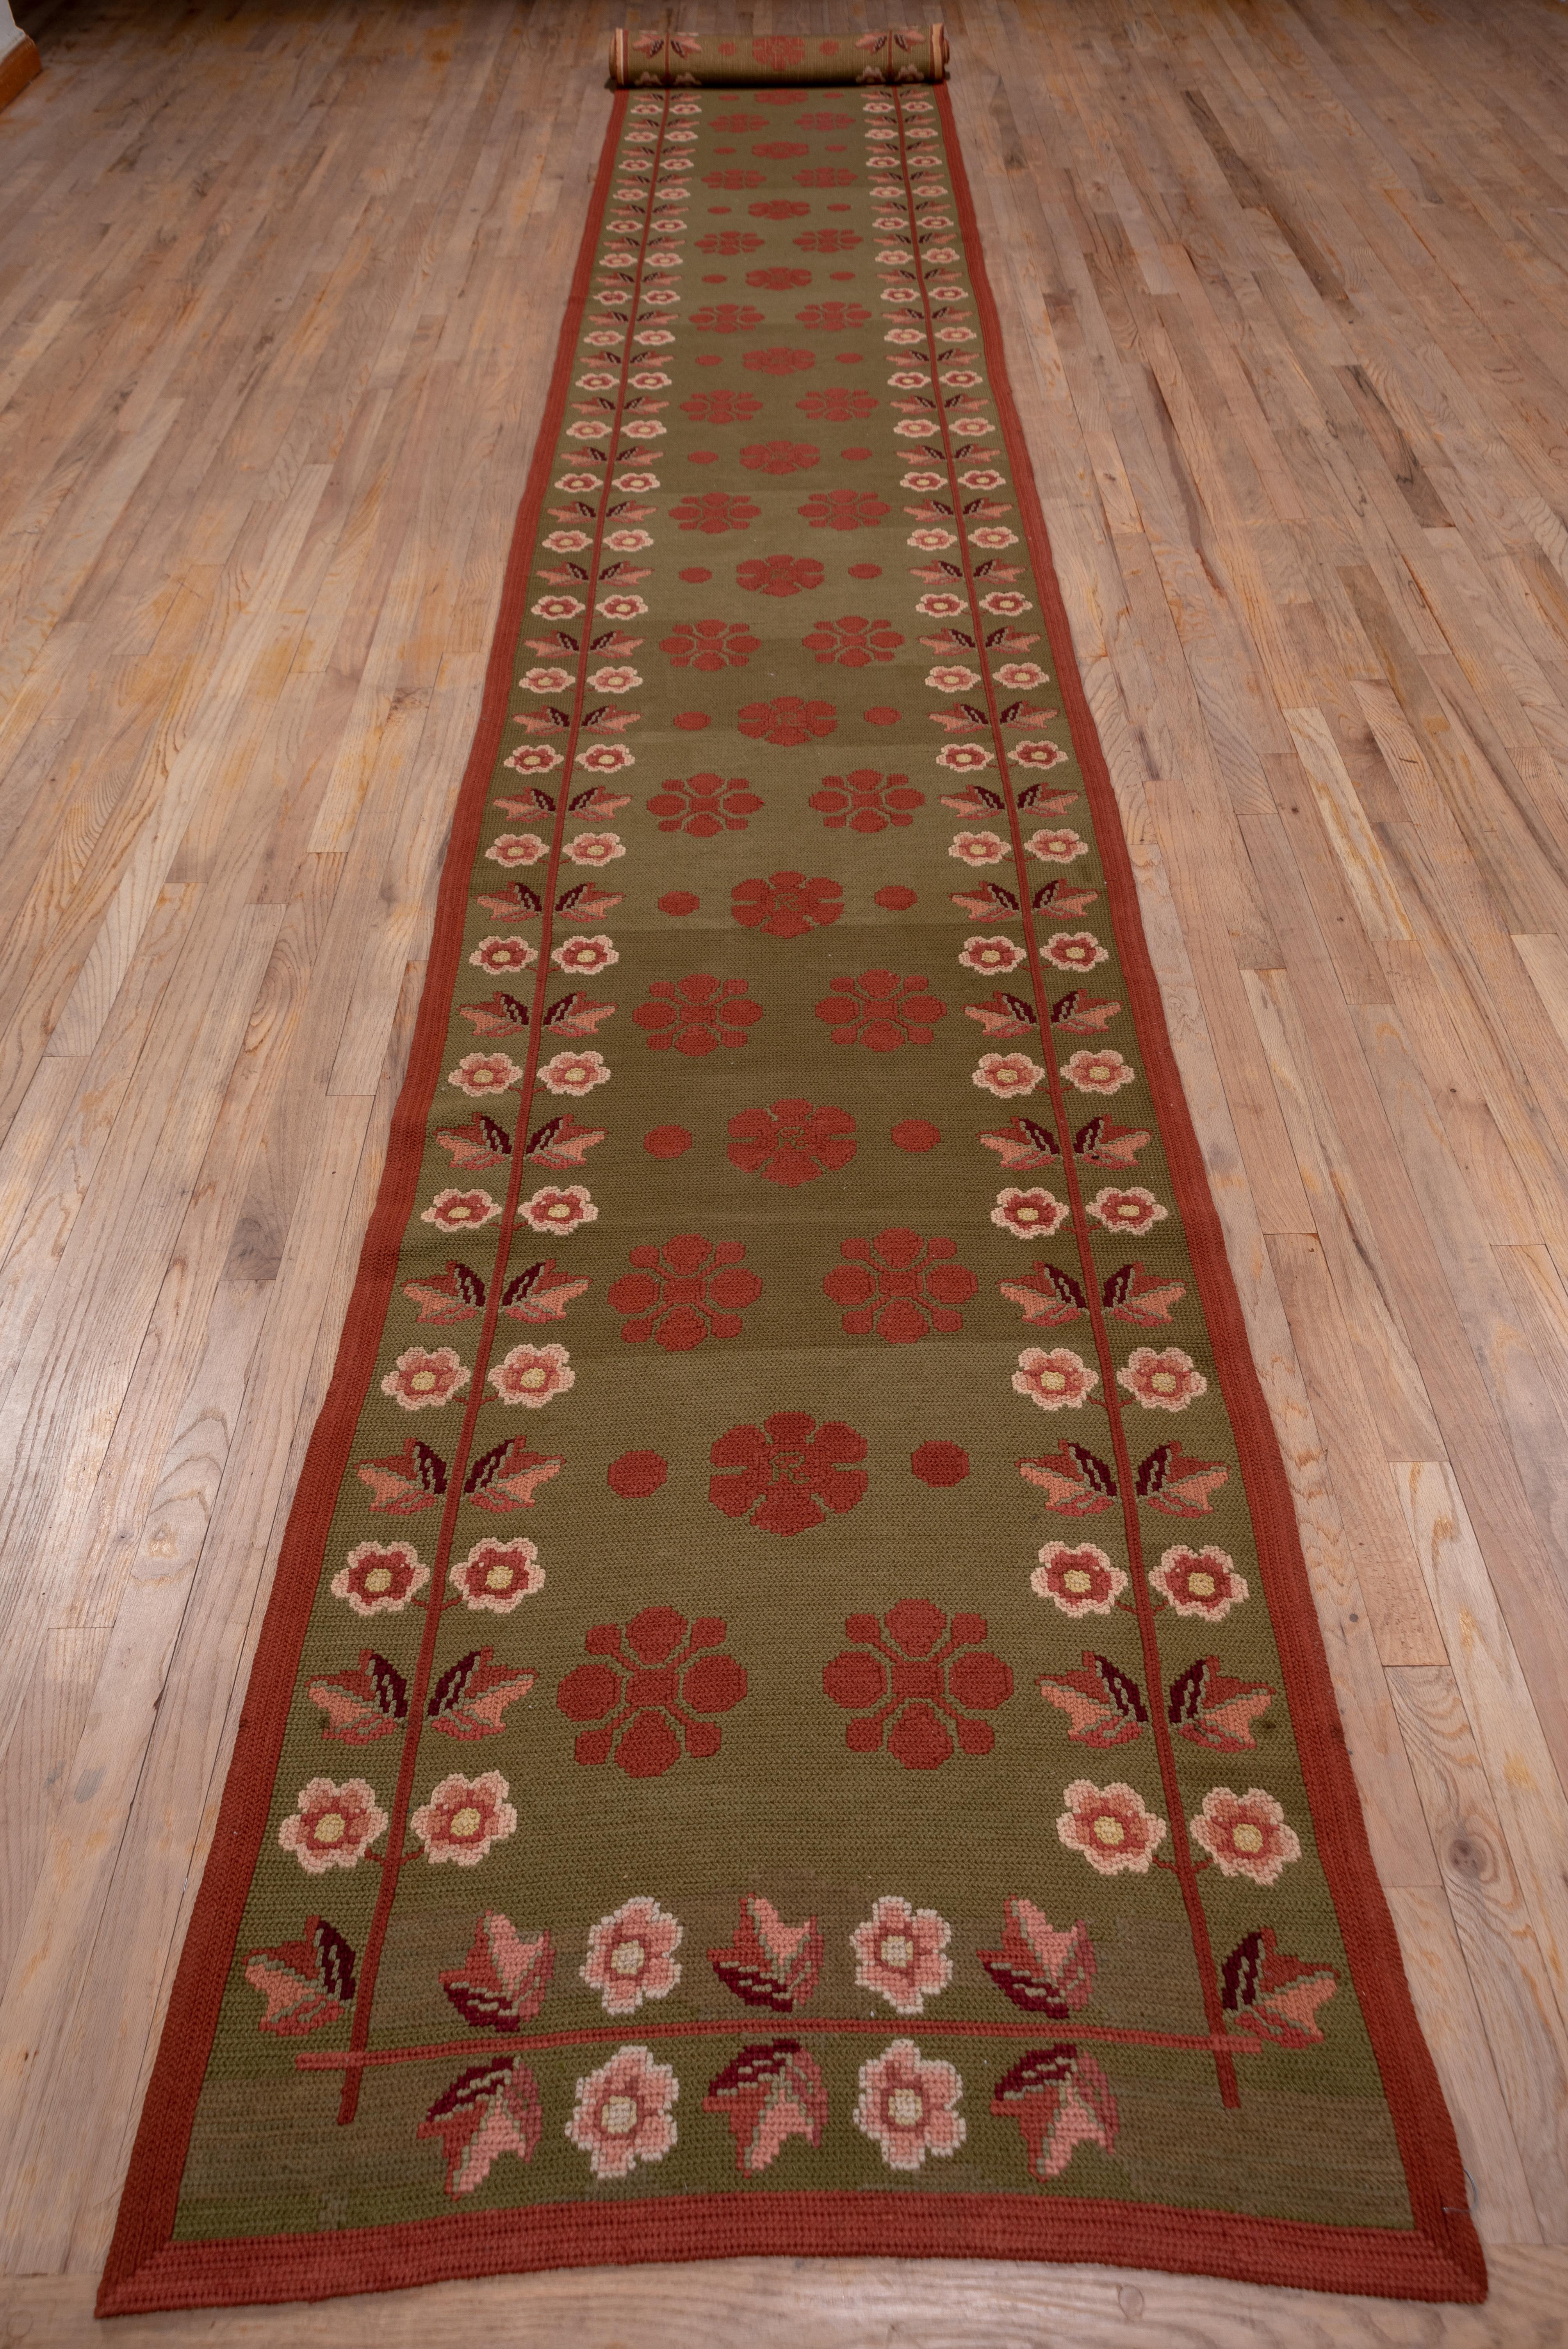 This pileless runner displays red petaled rosettes on a kelly green field with flowering stem border outlines. The surface is executed in a sort of herringbone stitch. The condition is excellent.